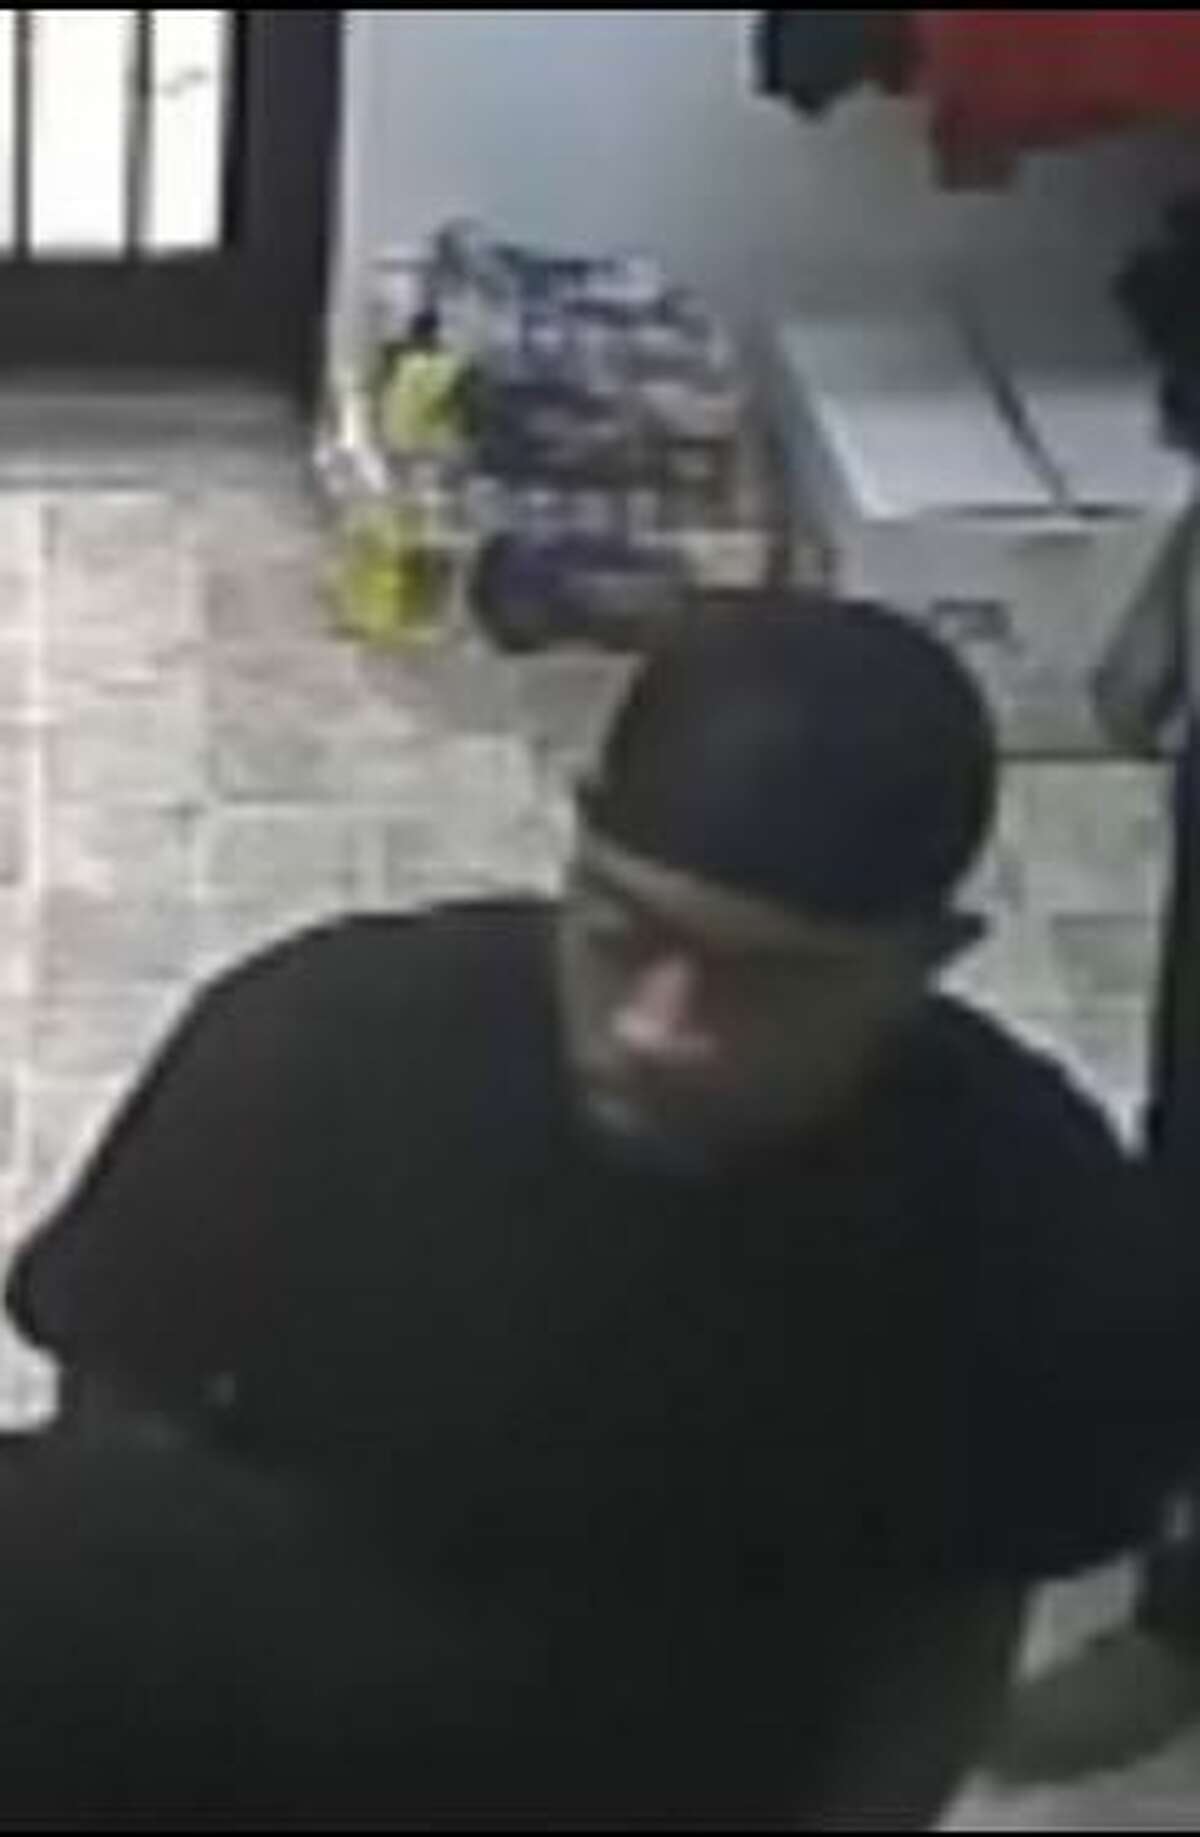 Beaumont police are asking for the public’s help identifying two men involved in a theft on February 11. 